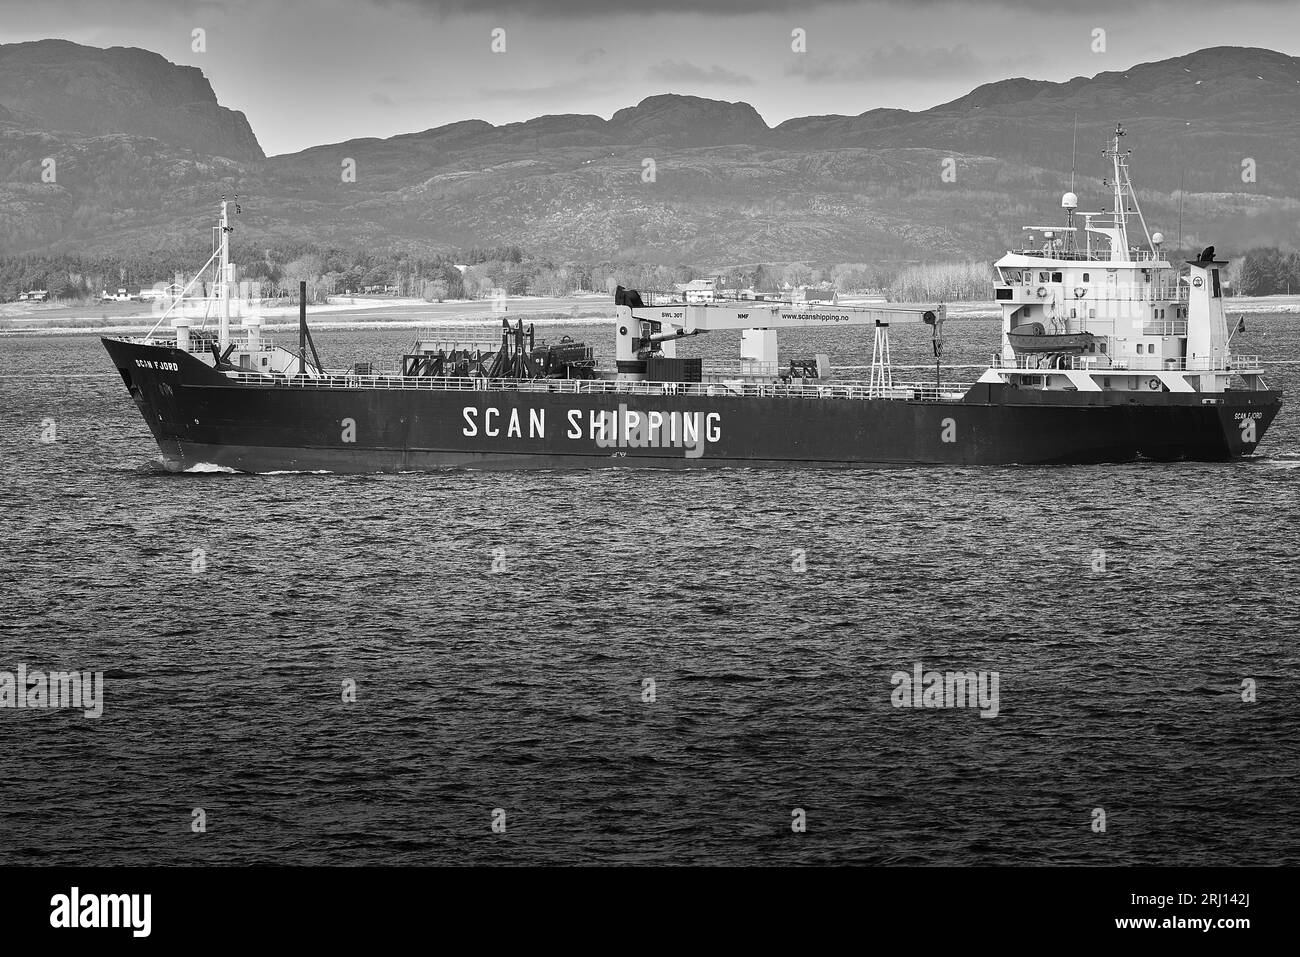 Black And White Photo Of The Scan Shipping Cargo/Container Ship, SCAN FJORD, Underway At The Mouth Of The Trondheim Fjord (Trondheimsfjorden), Norway Stock Photo